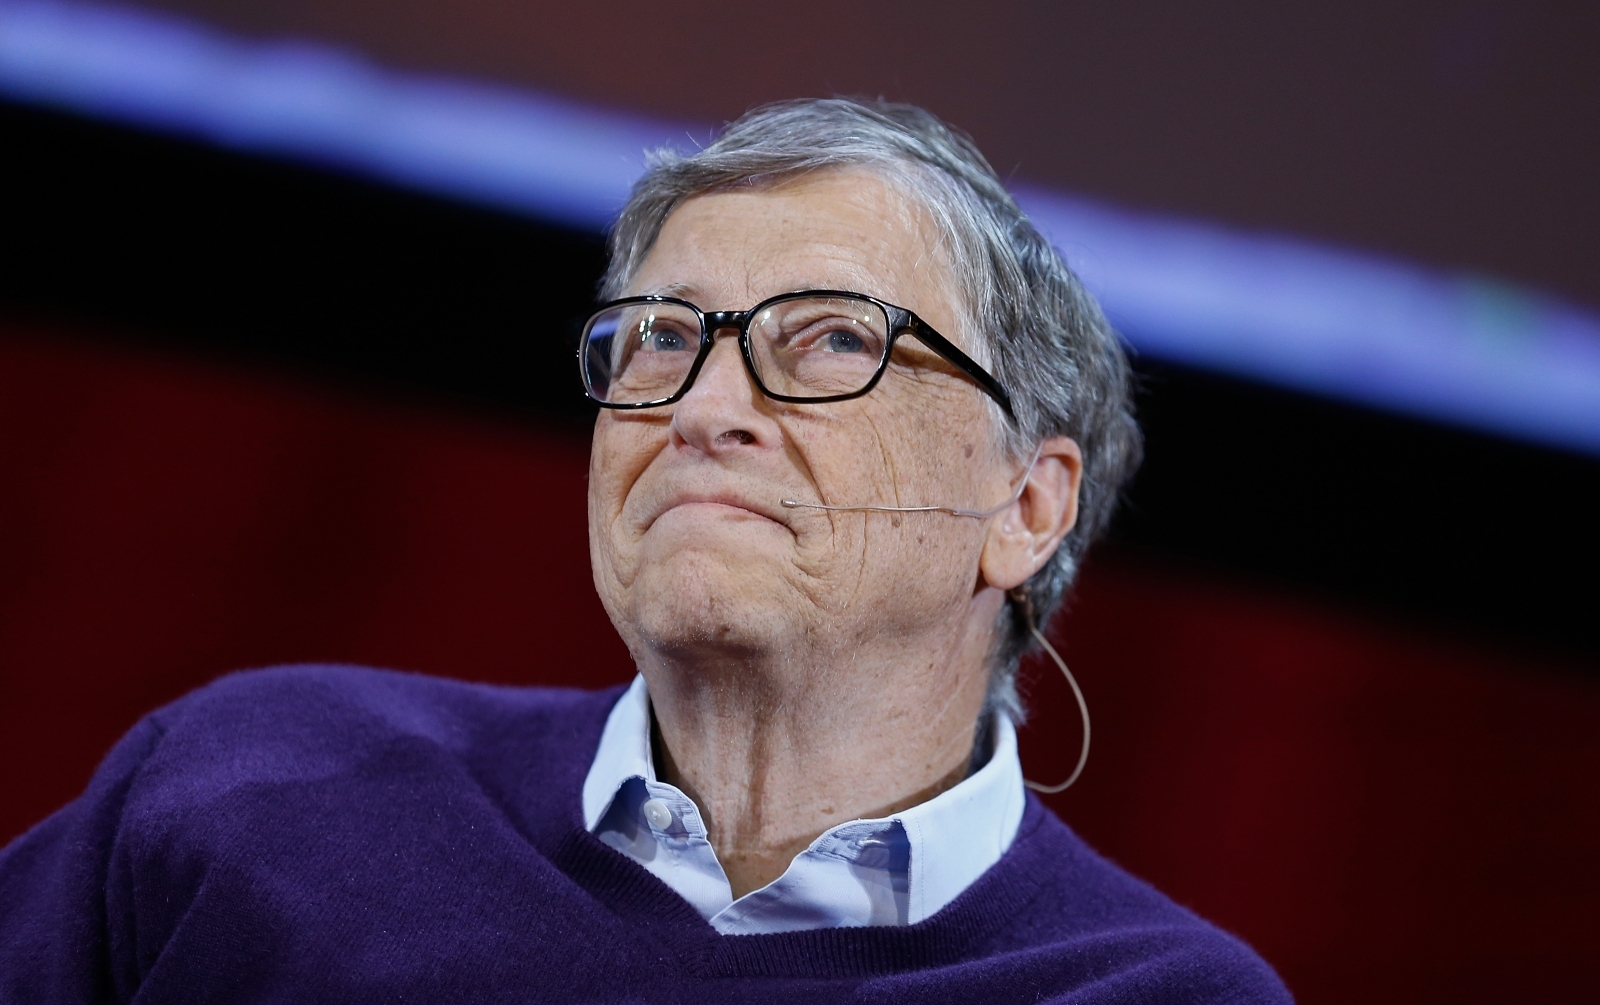 Bill Gates warns 'super risky' cryptocurrency has 'caused ...